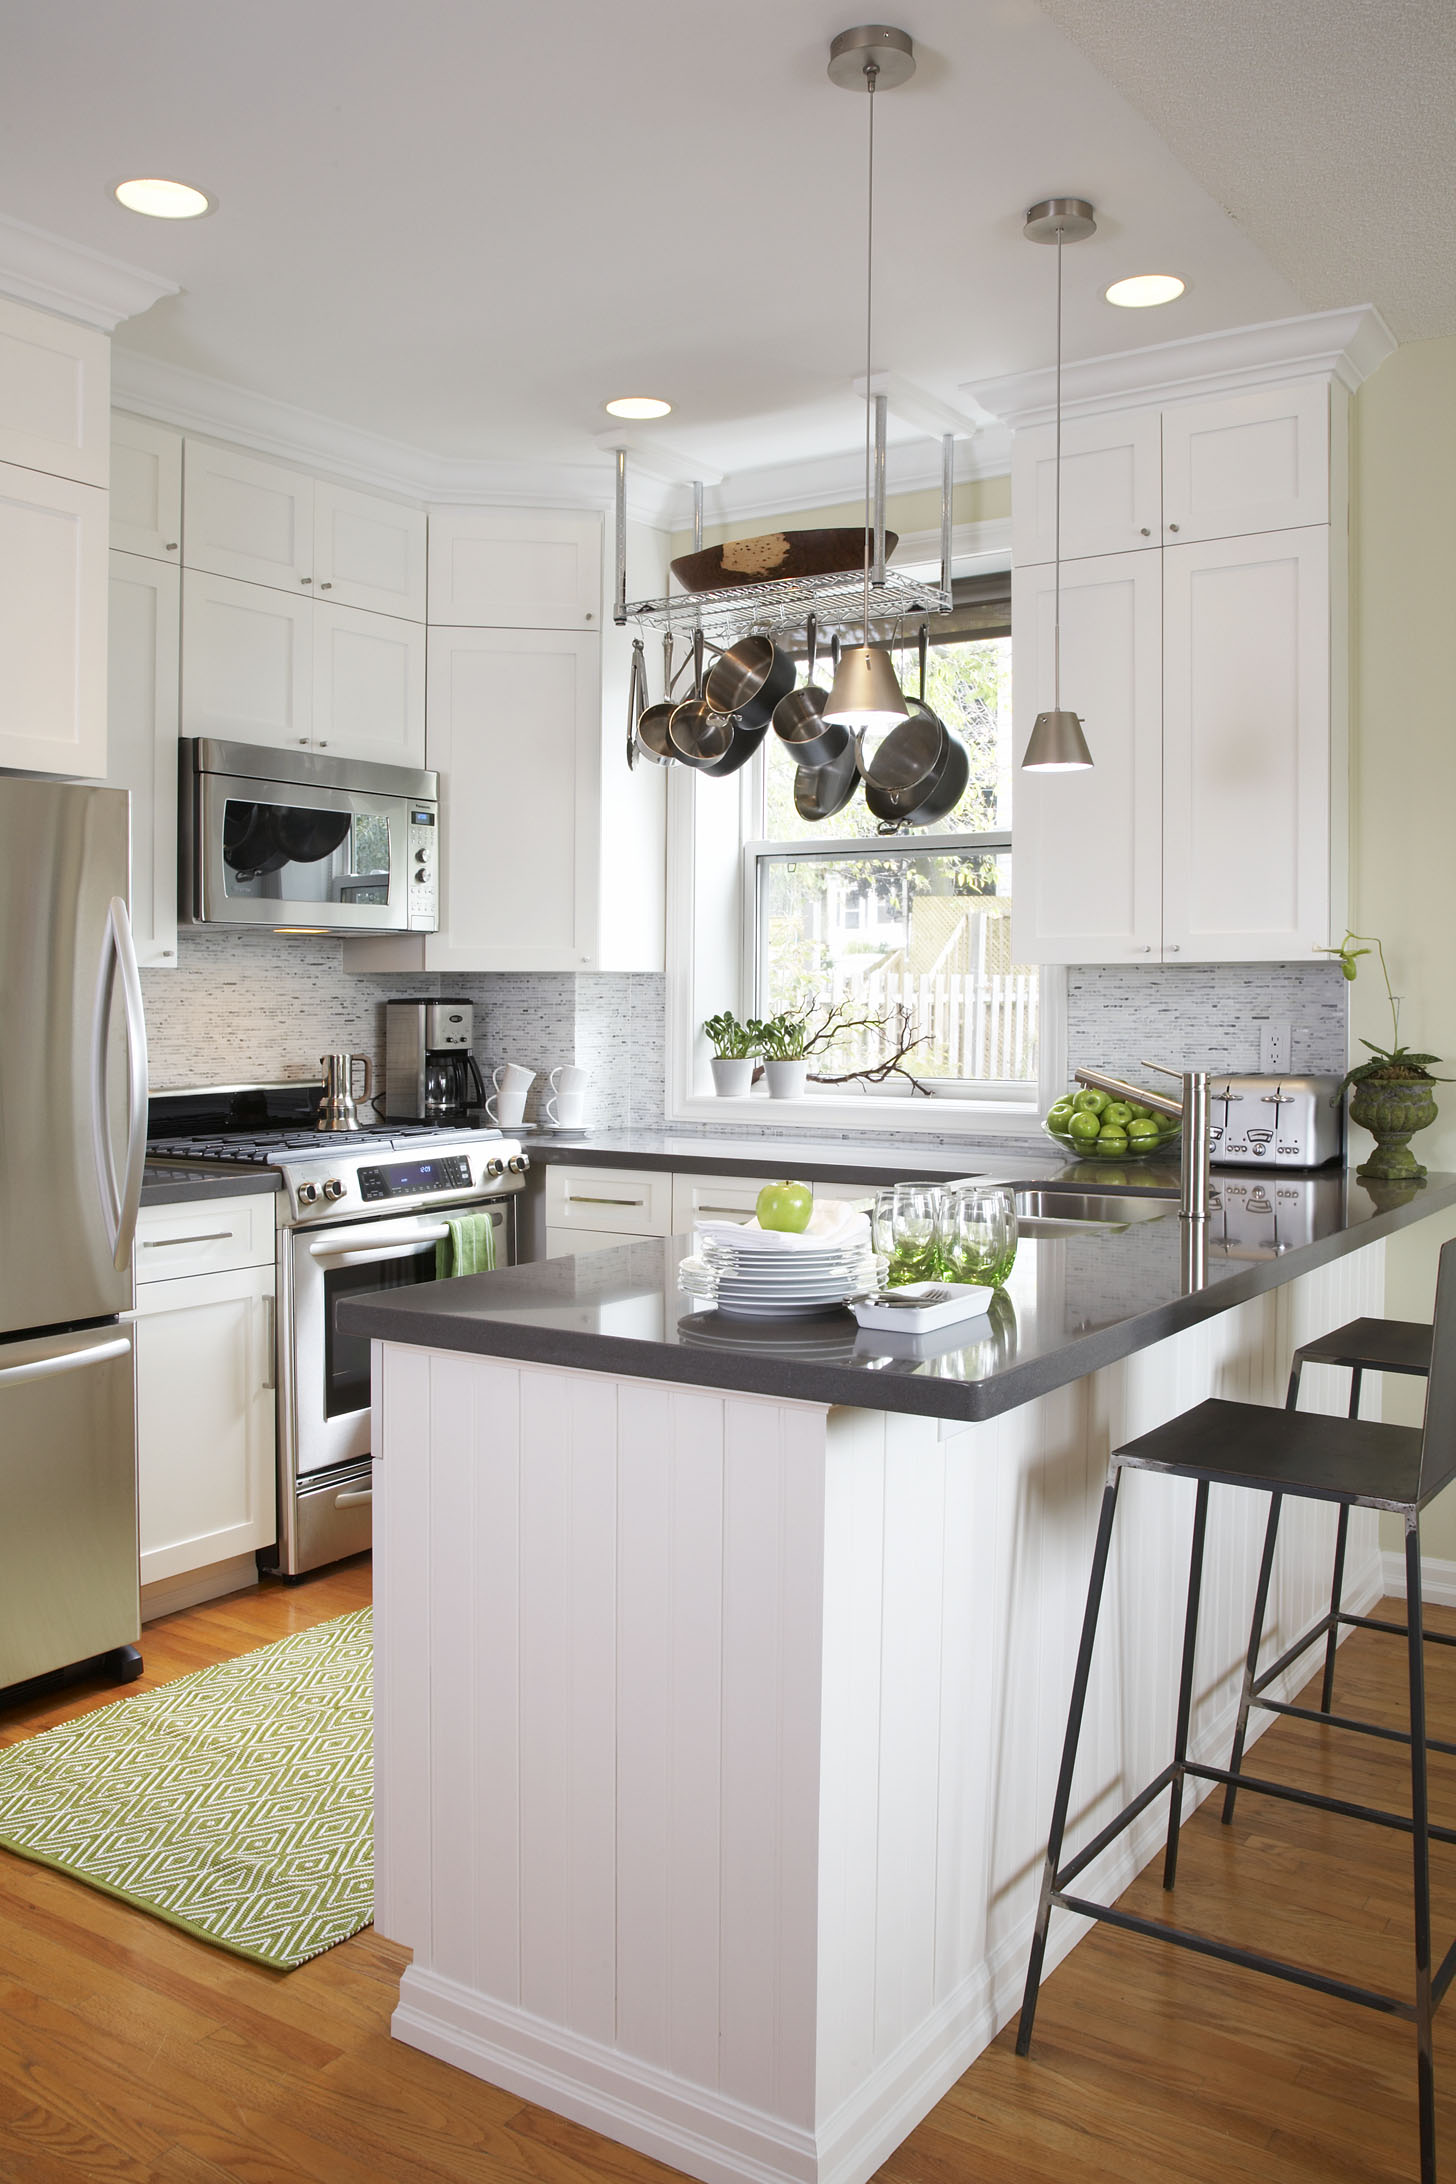 Simple White Kitchen Cabinets For Small Kitchen for Simple Design